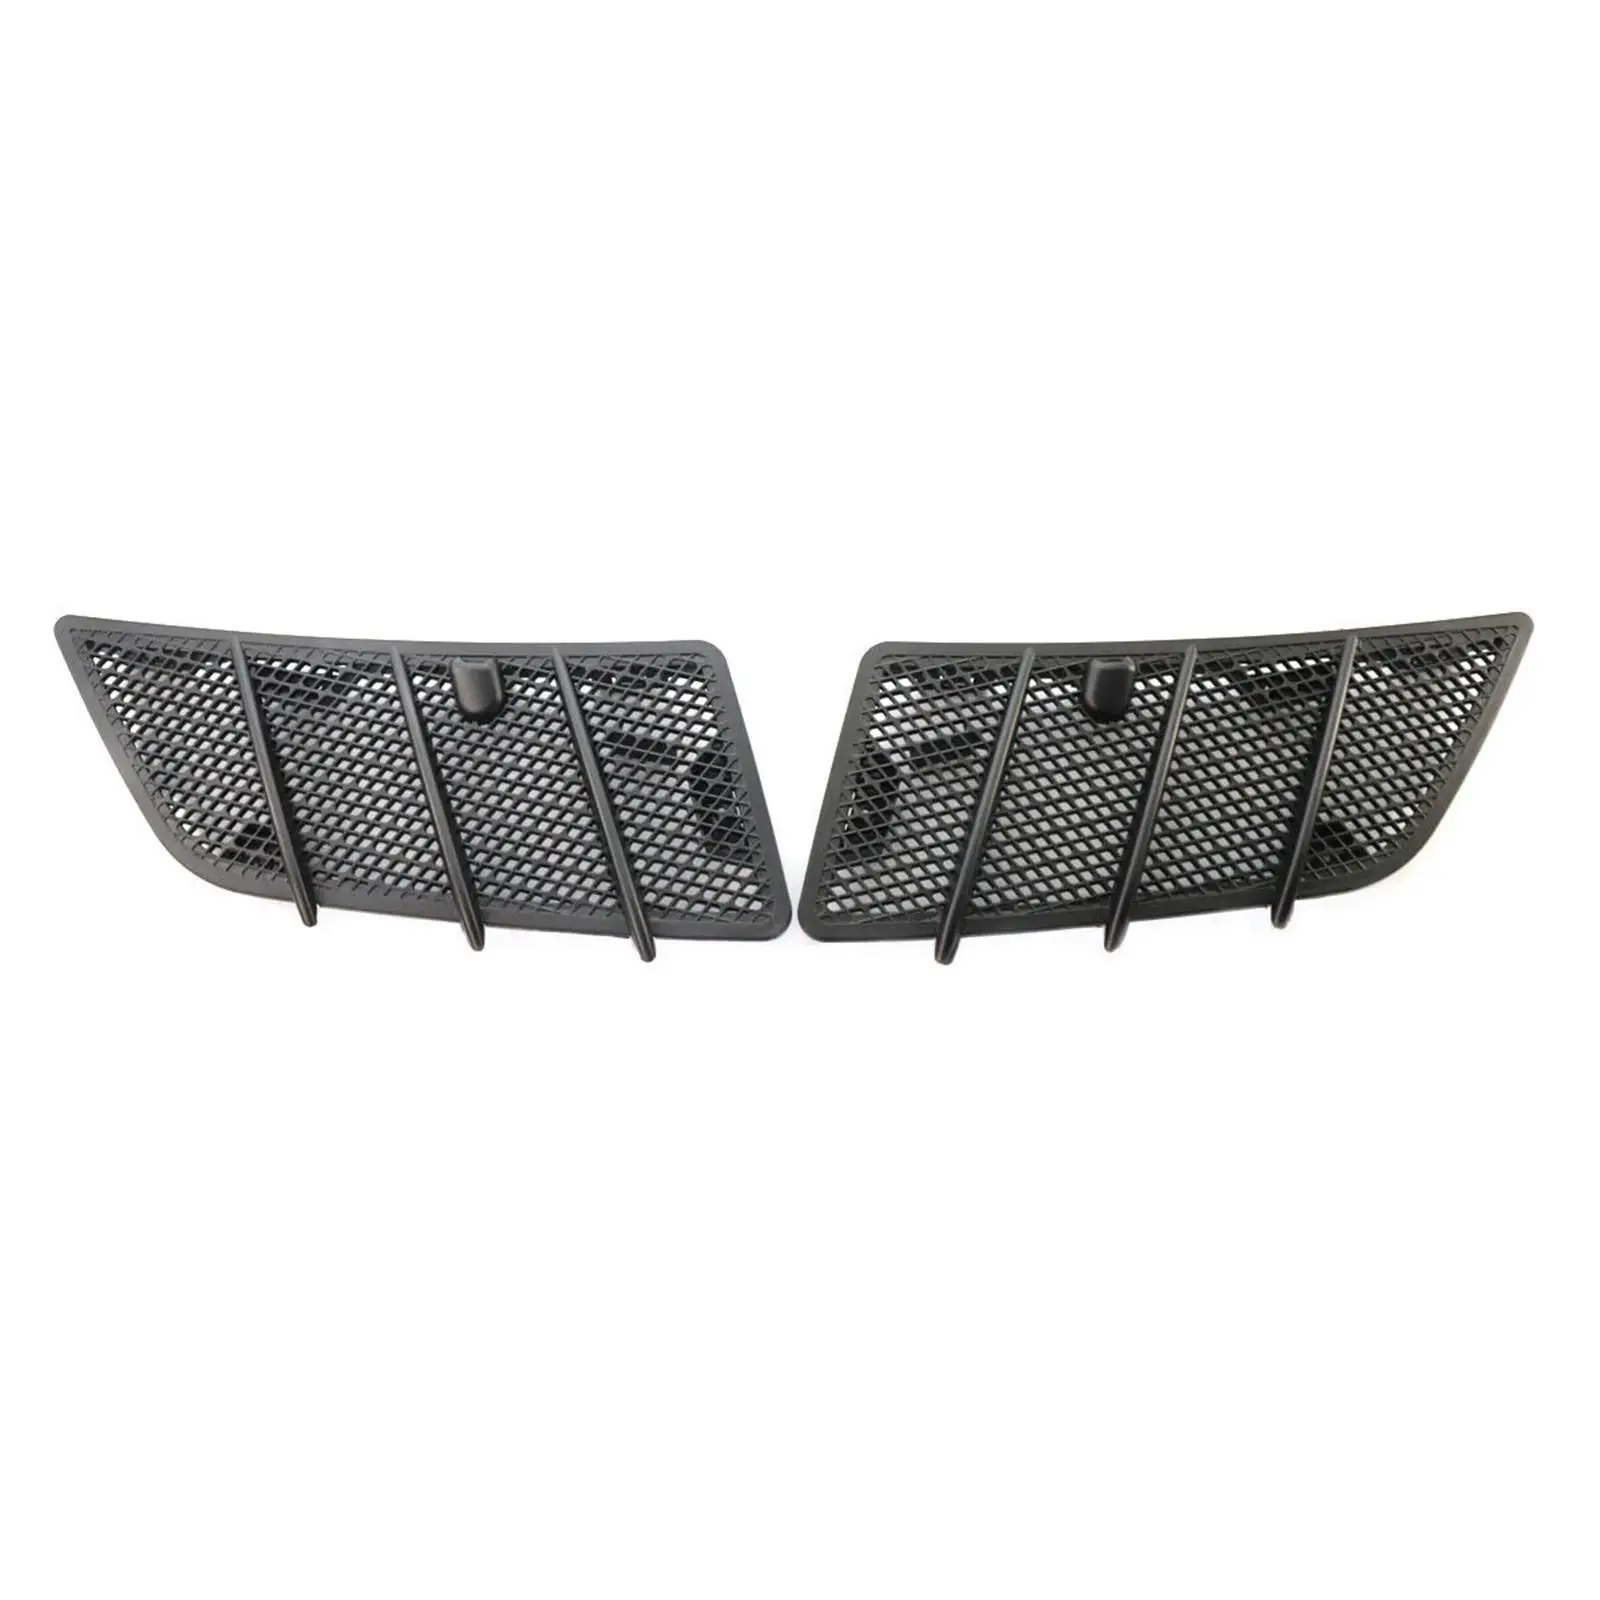 Hood Air Vent Grille Cover Directly Replace High Quality Durable for Mercedes-benz W164 ml GL Class Automotive Accessories